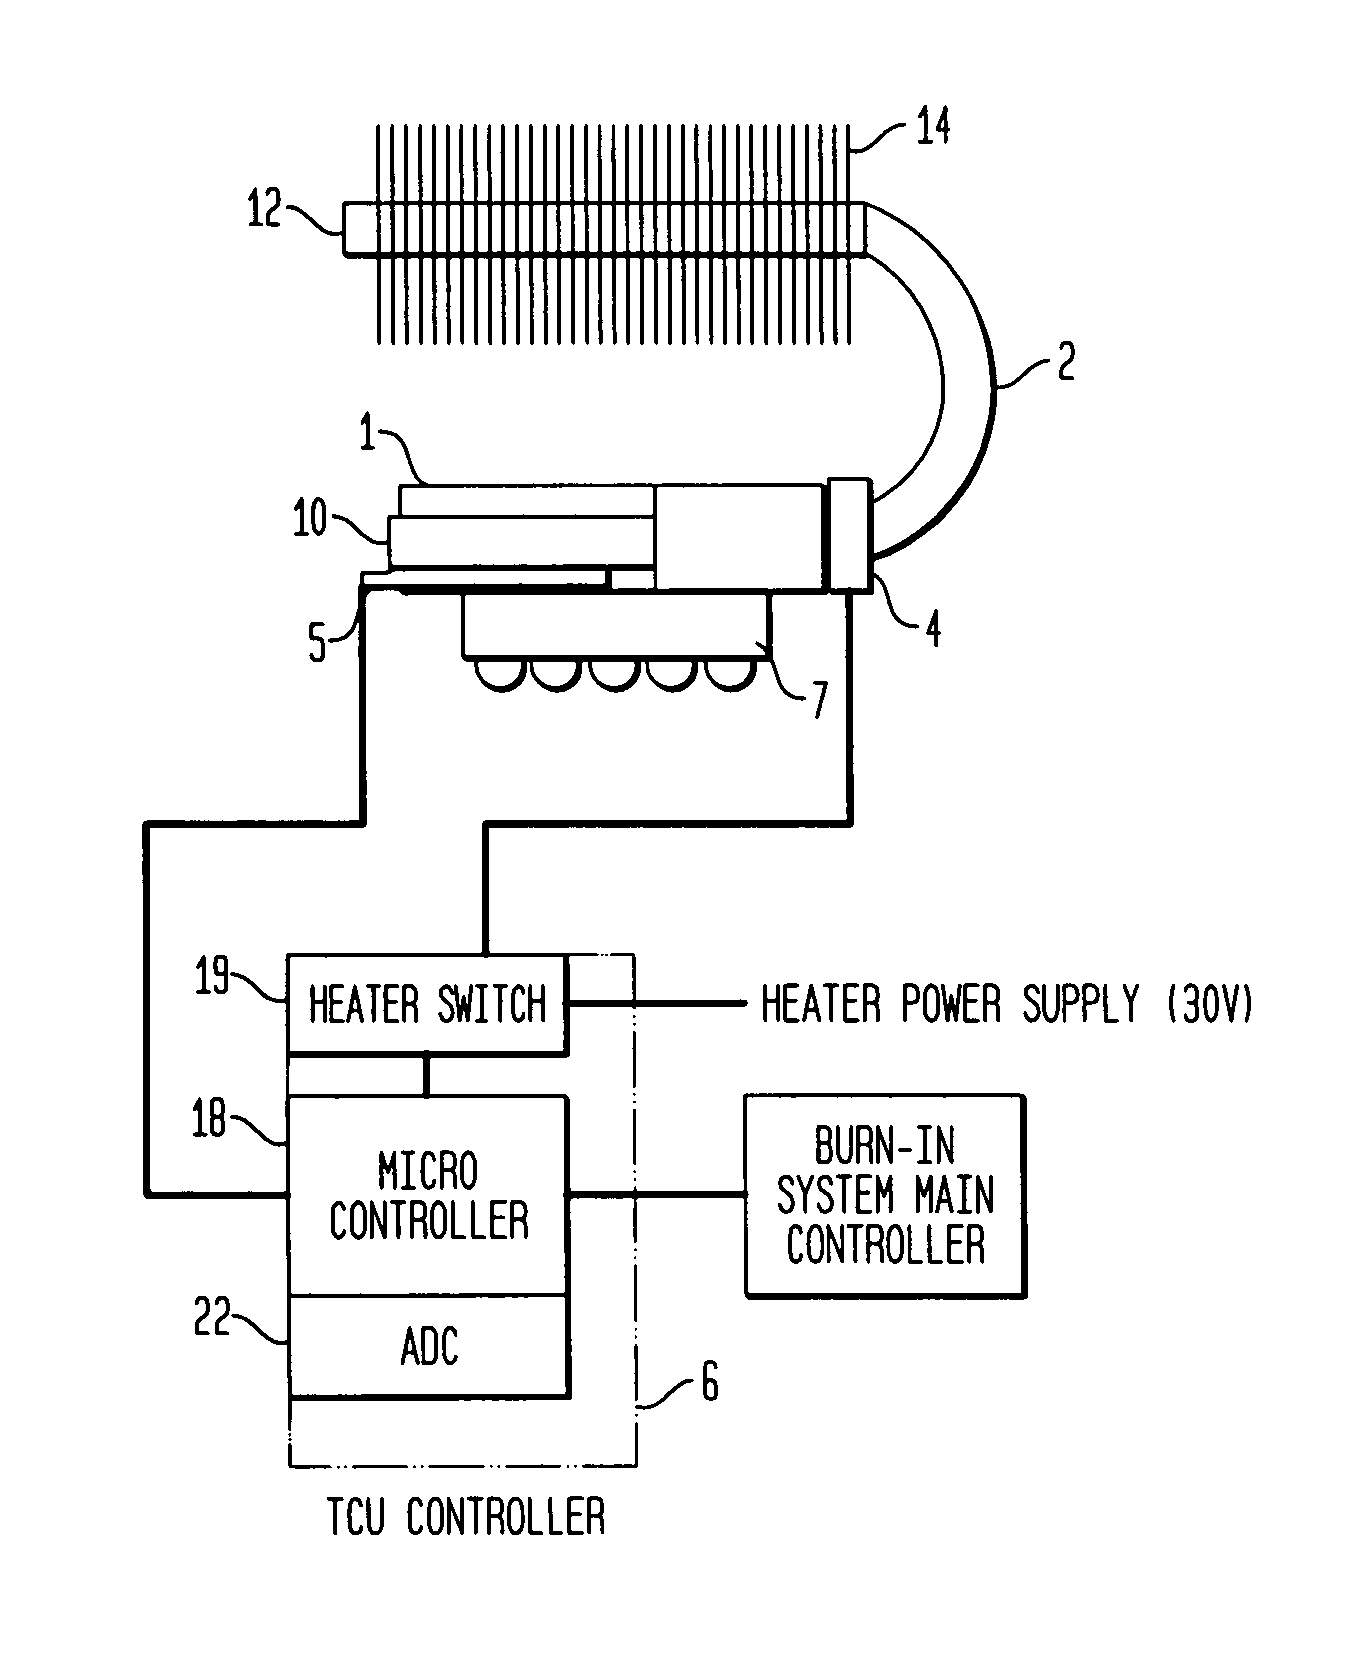 Thermal control unit for semiconductor testing